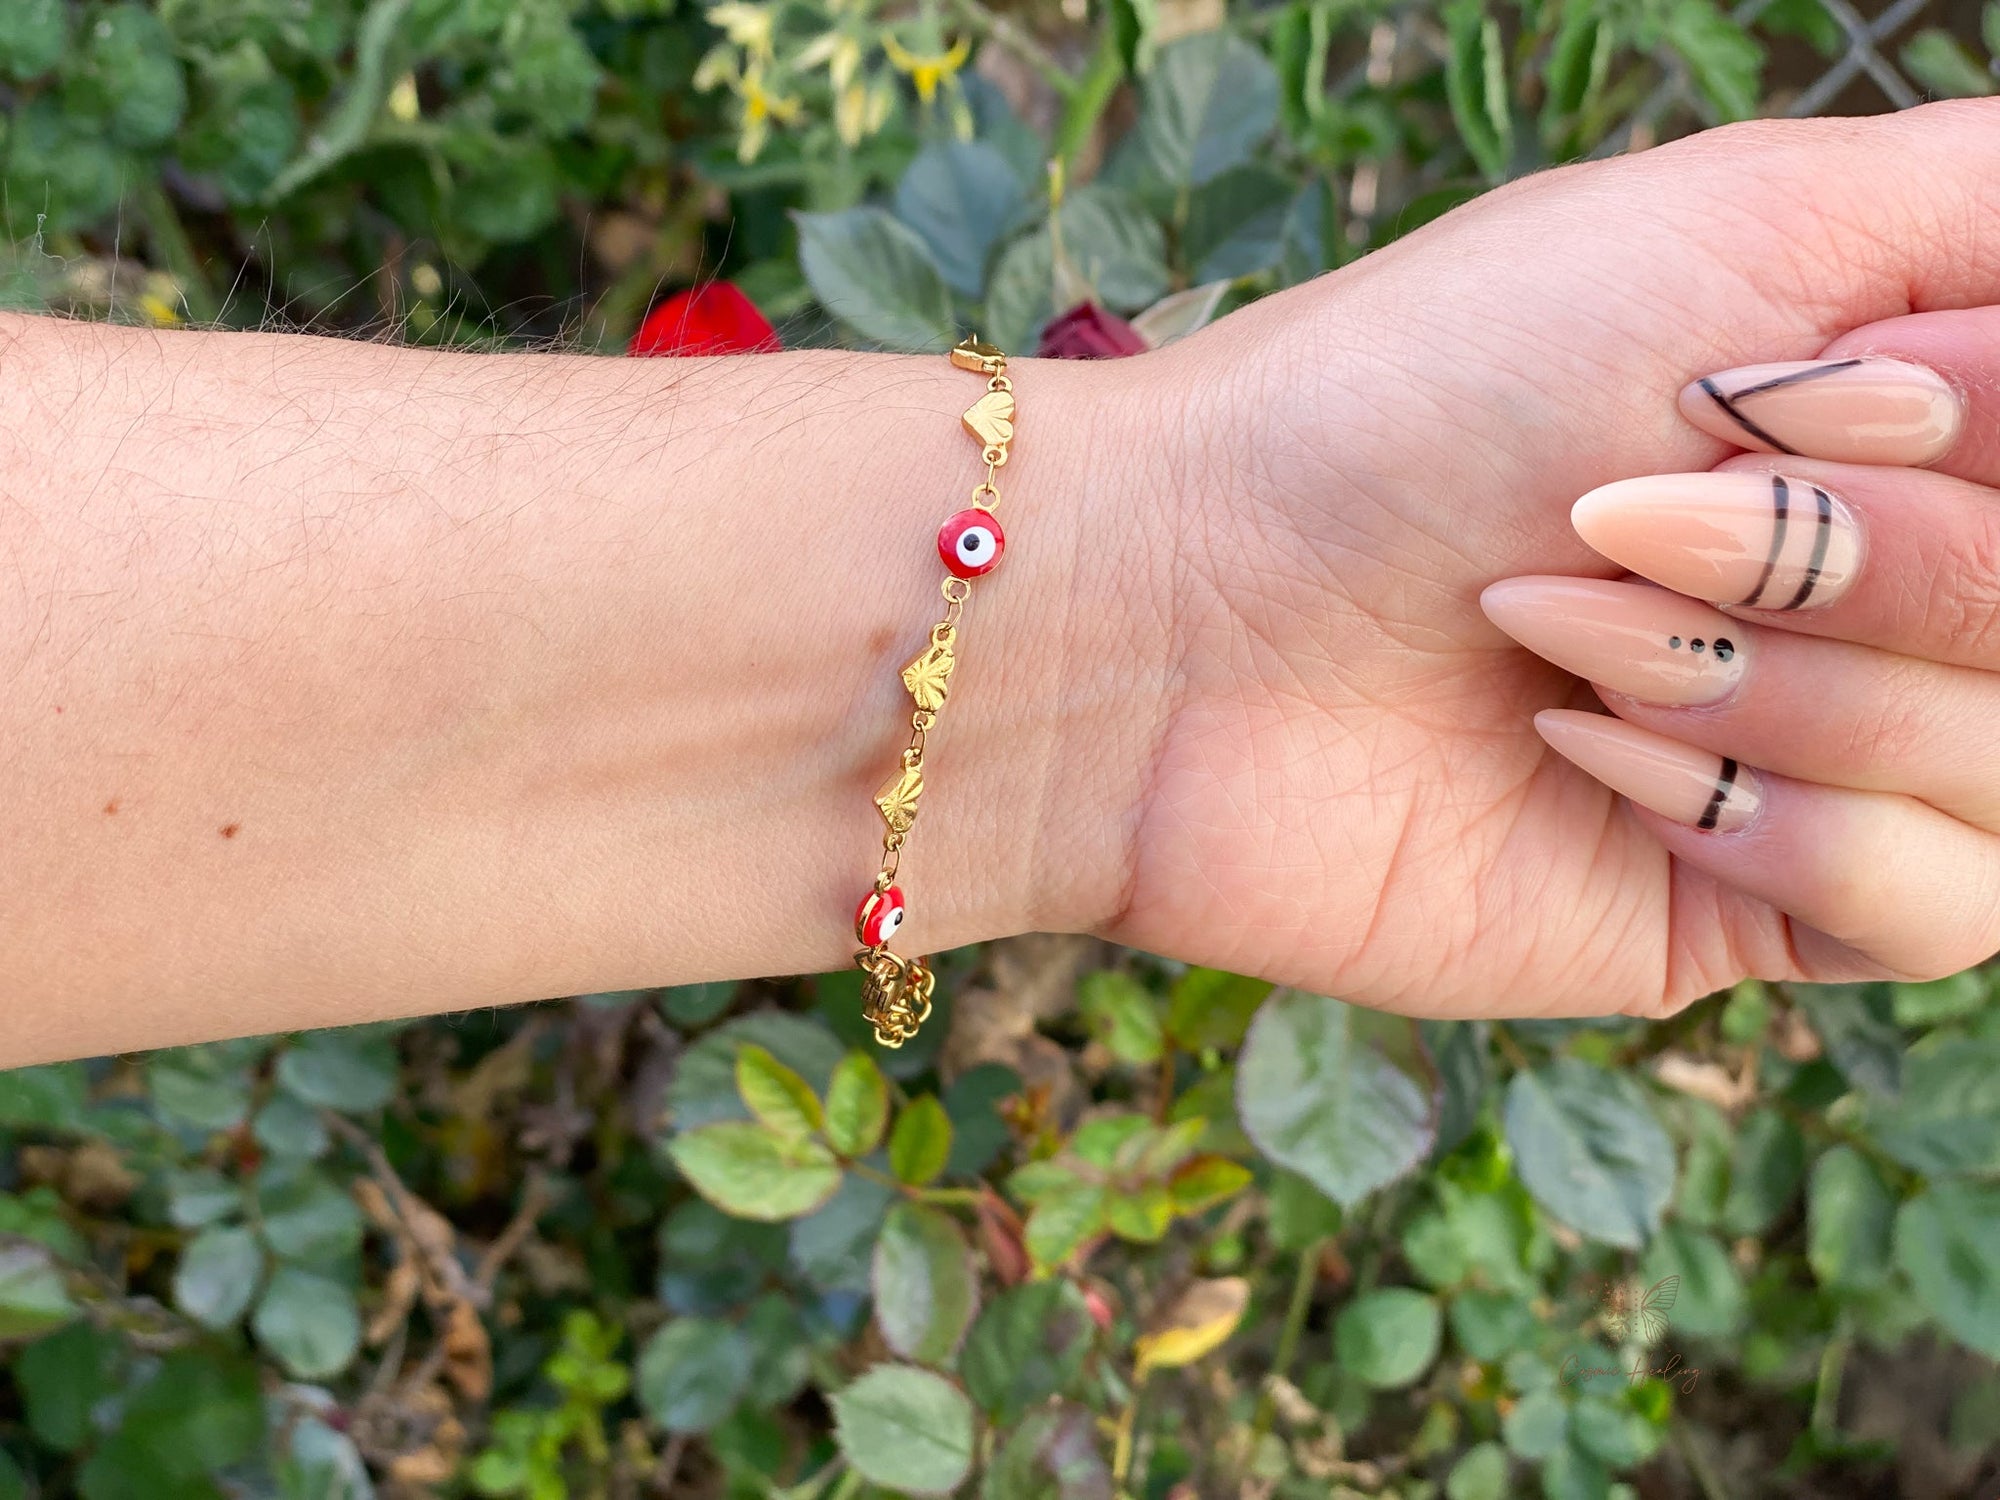 Red Evil Eye Charm Bracelet with Hearts - Shop Cosmic Healing